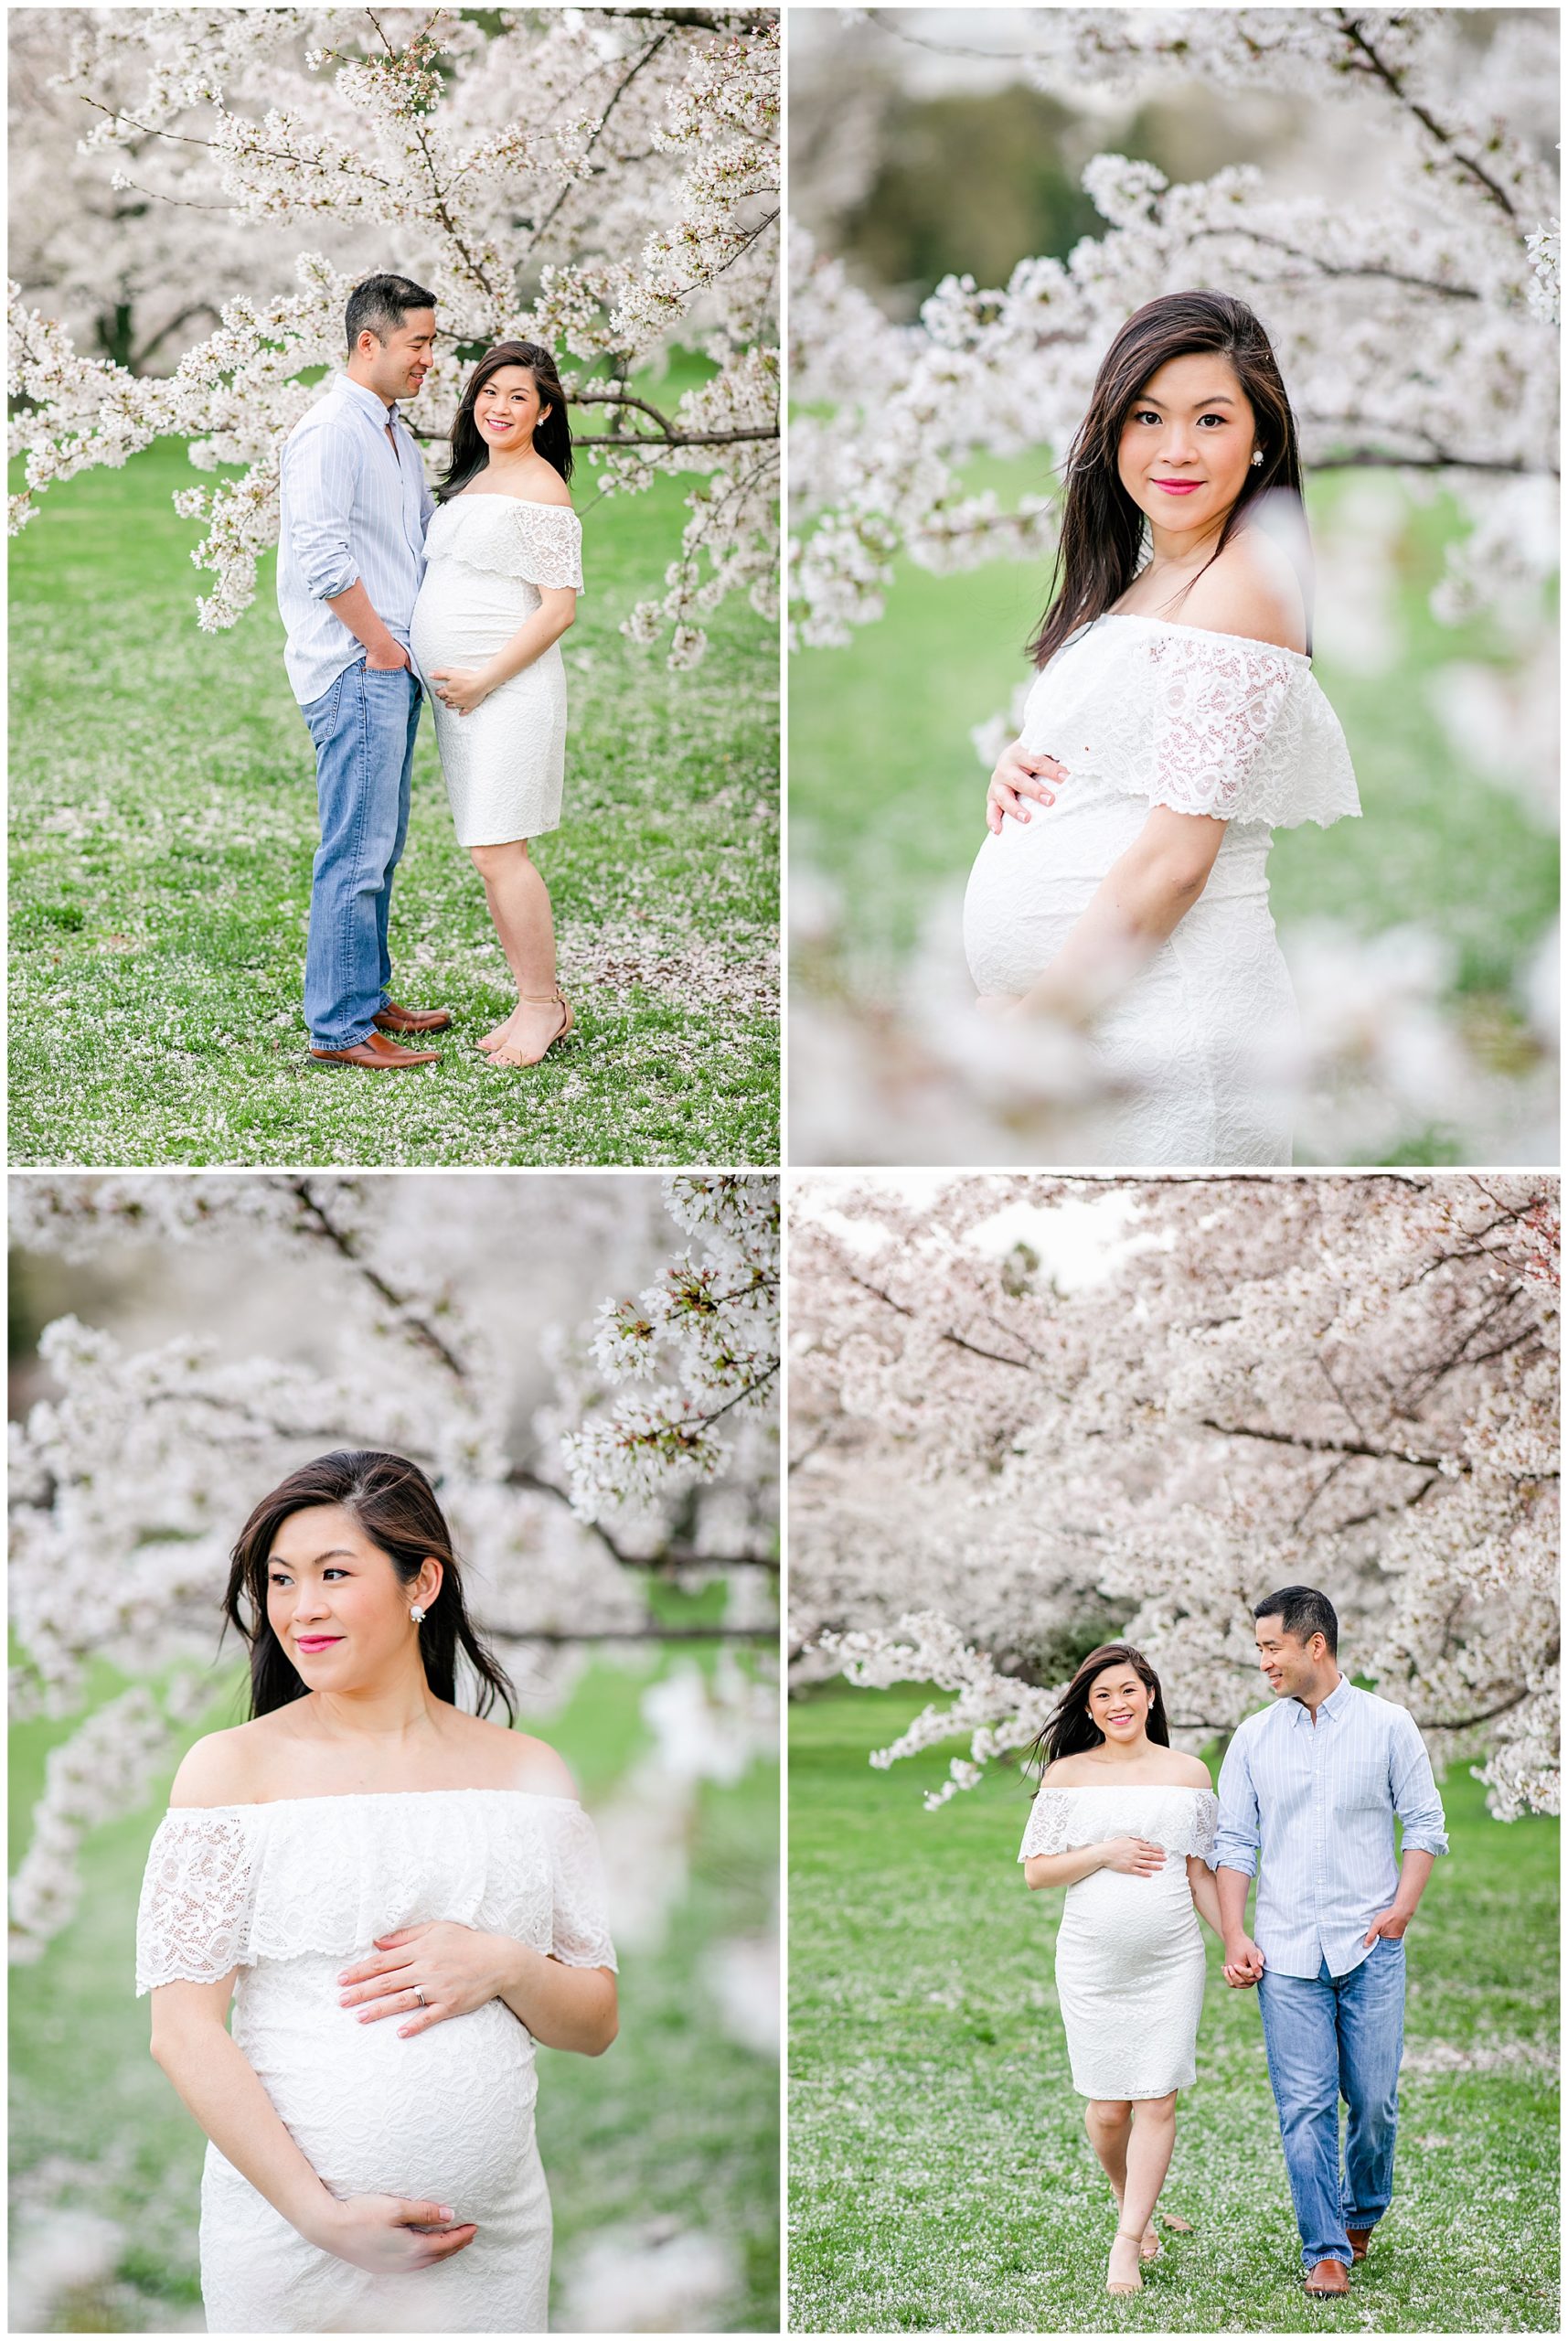 romantic cherry blossoms maternity photos, DC maternity photos, DC cherry blossoms photographer, DC cherry blossoms season, cherry blossoms photo ideas, feminine maternity photos, romantic maternity photos, DC wedding photographer, Rachel E.H. Photography, natural light maternity photos, DC photographer, surrounded by cherry blossoms